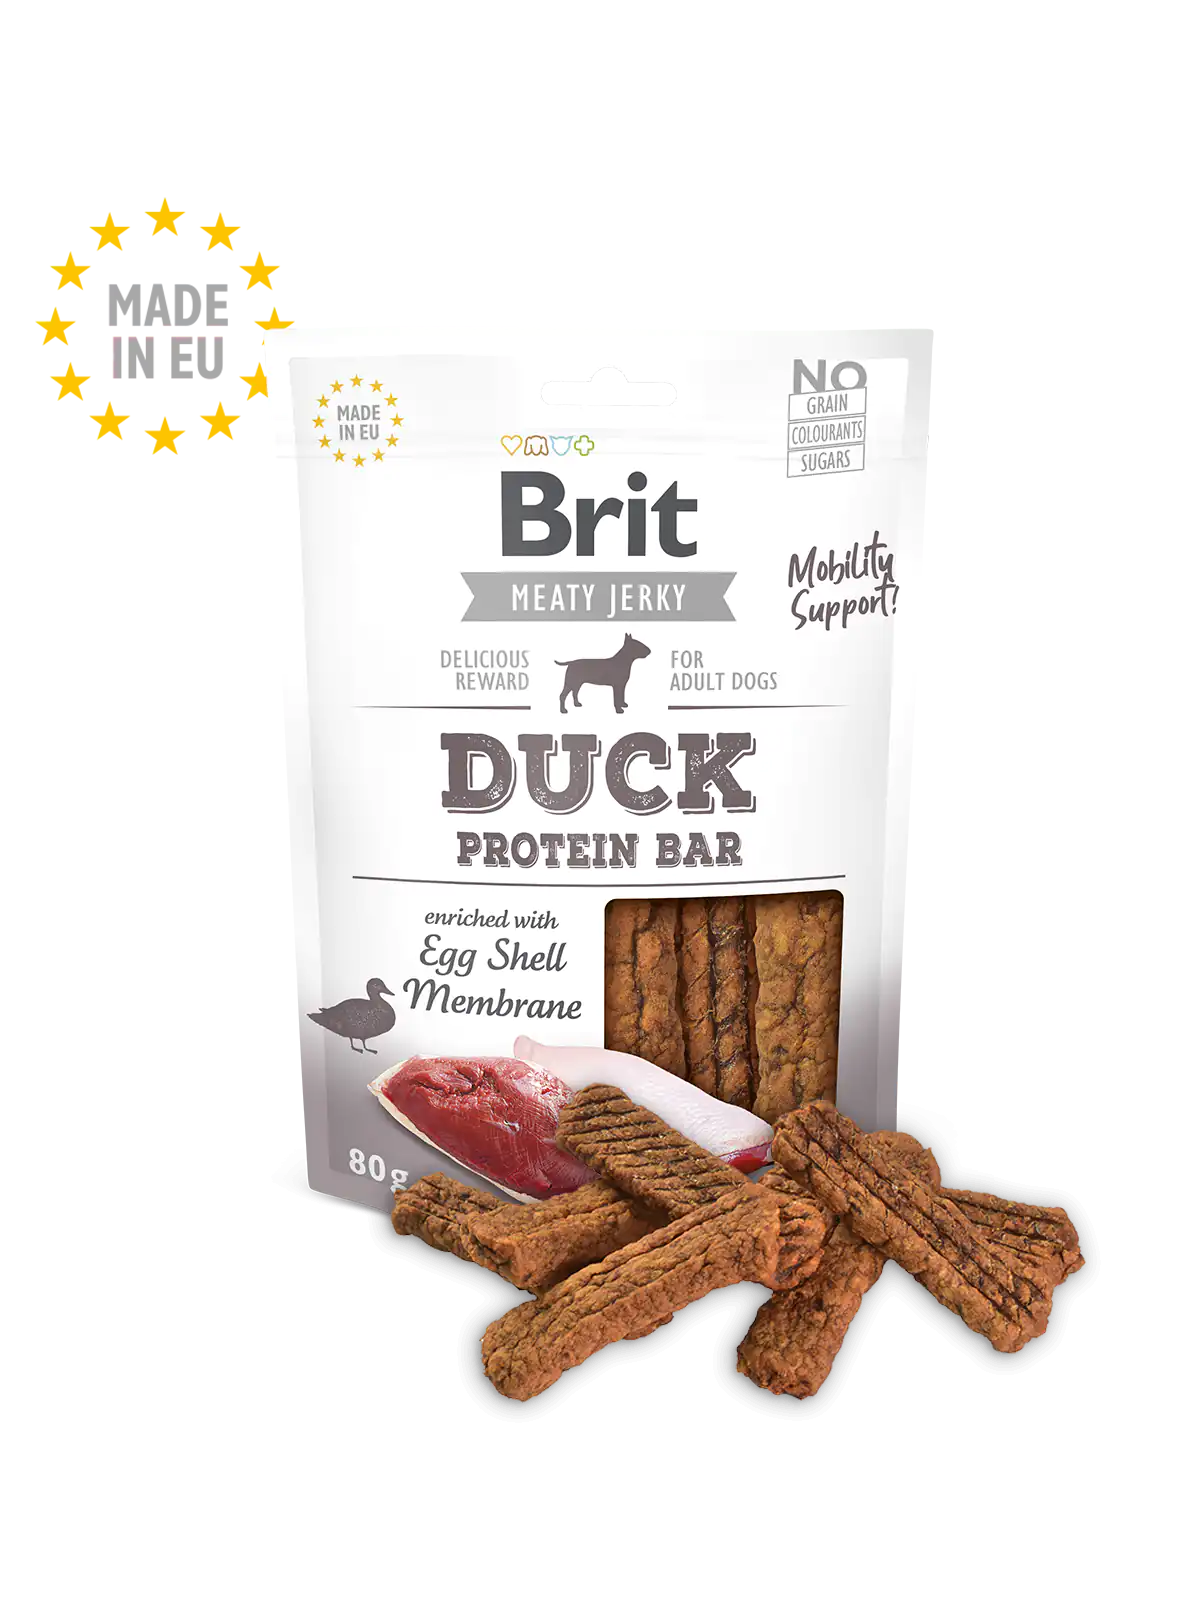 Friandises Protein Bar - Brit Meat Jerky